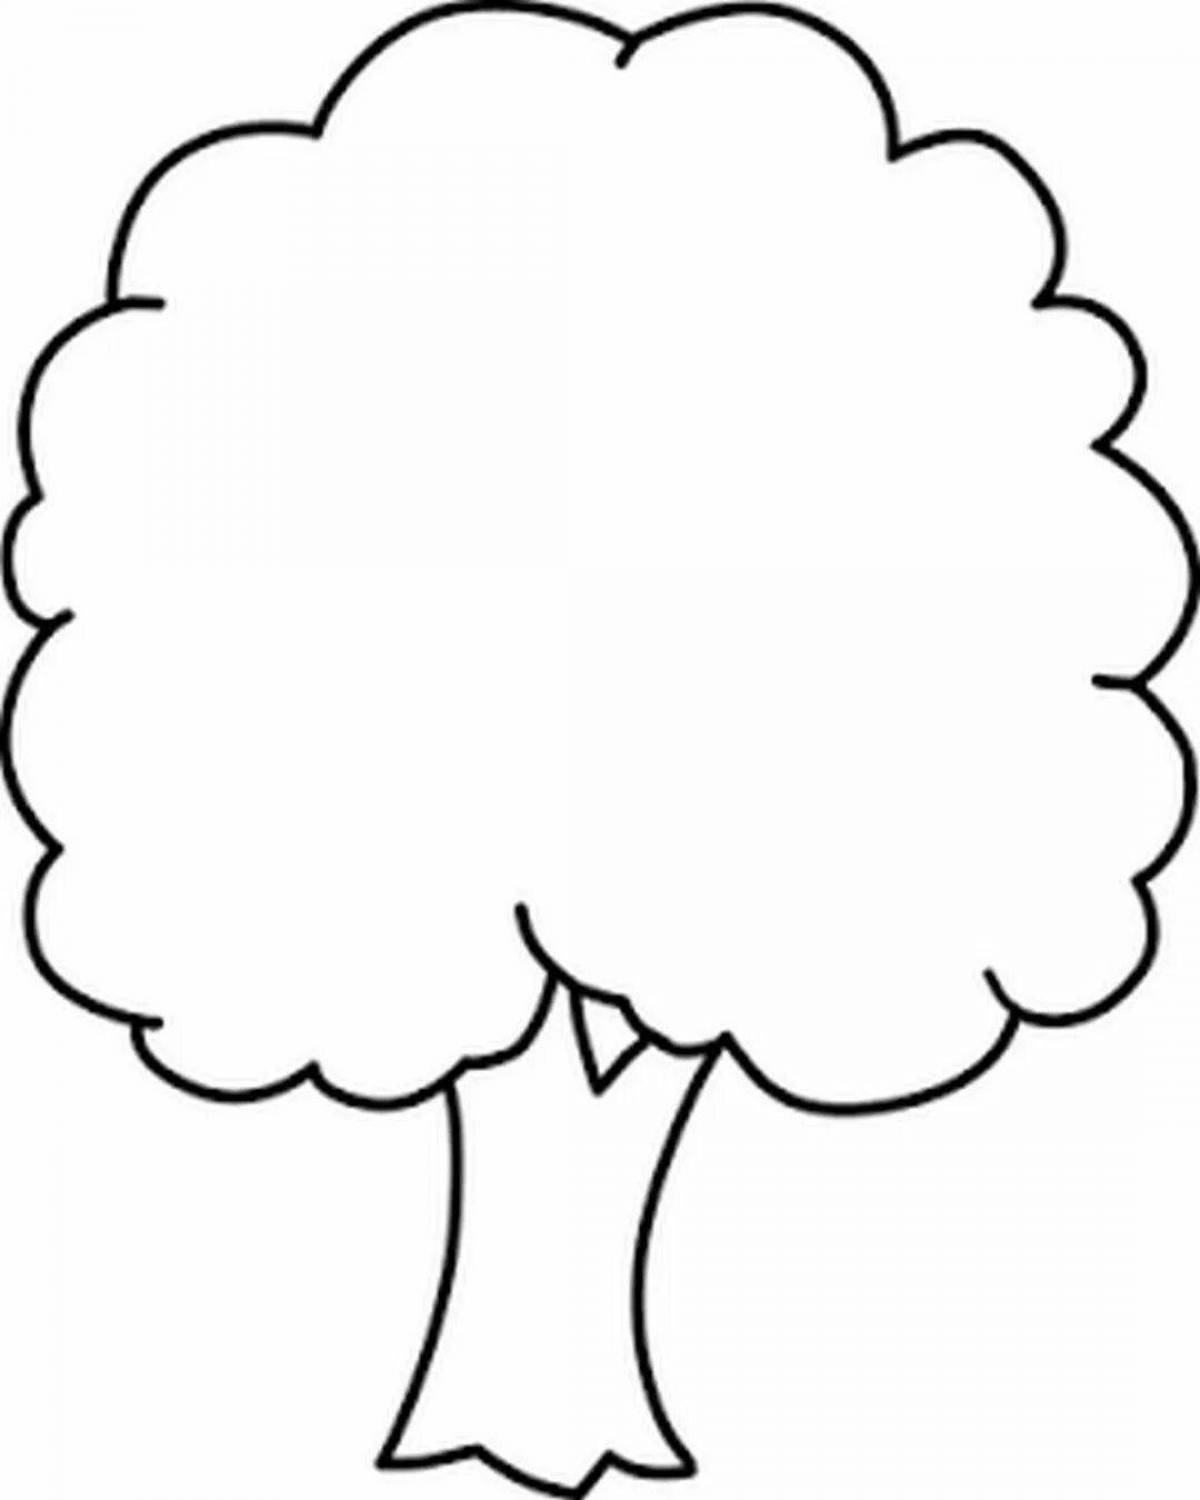 Drawing tree for kids #5